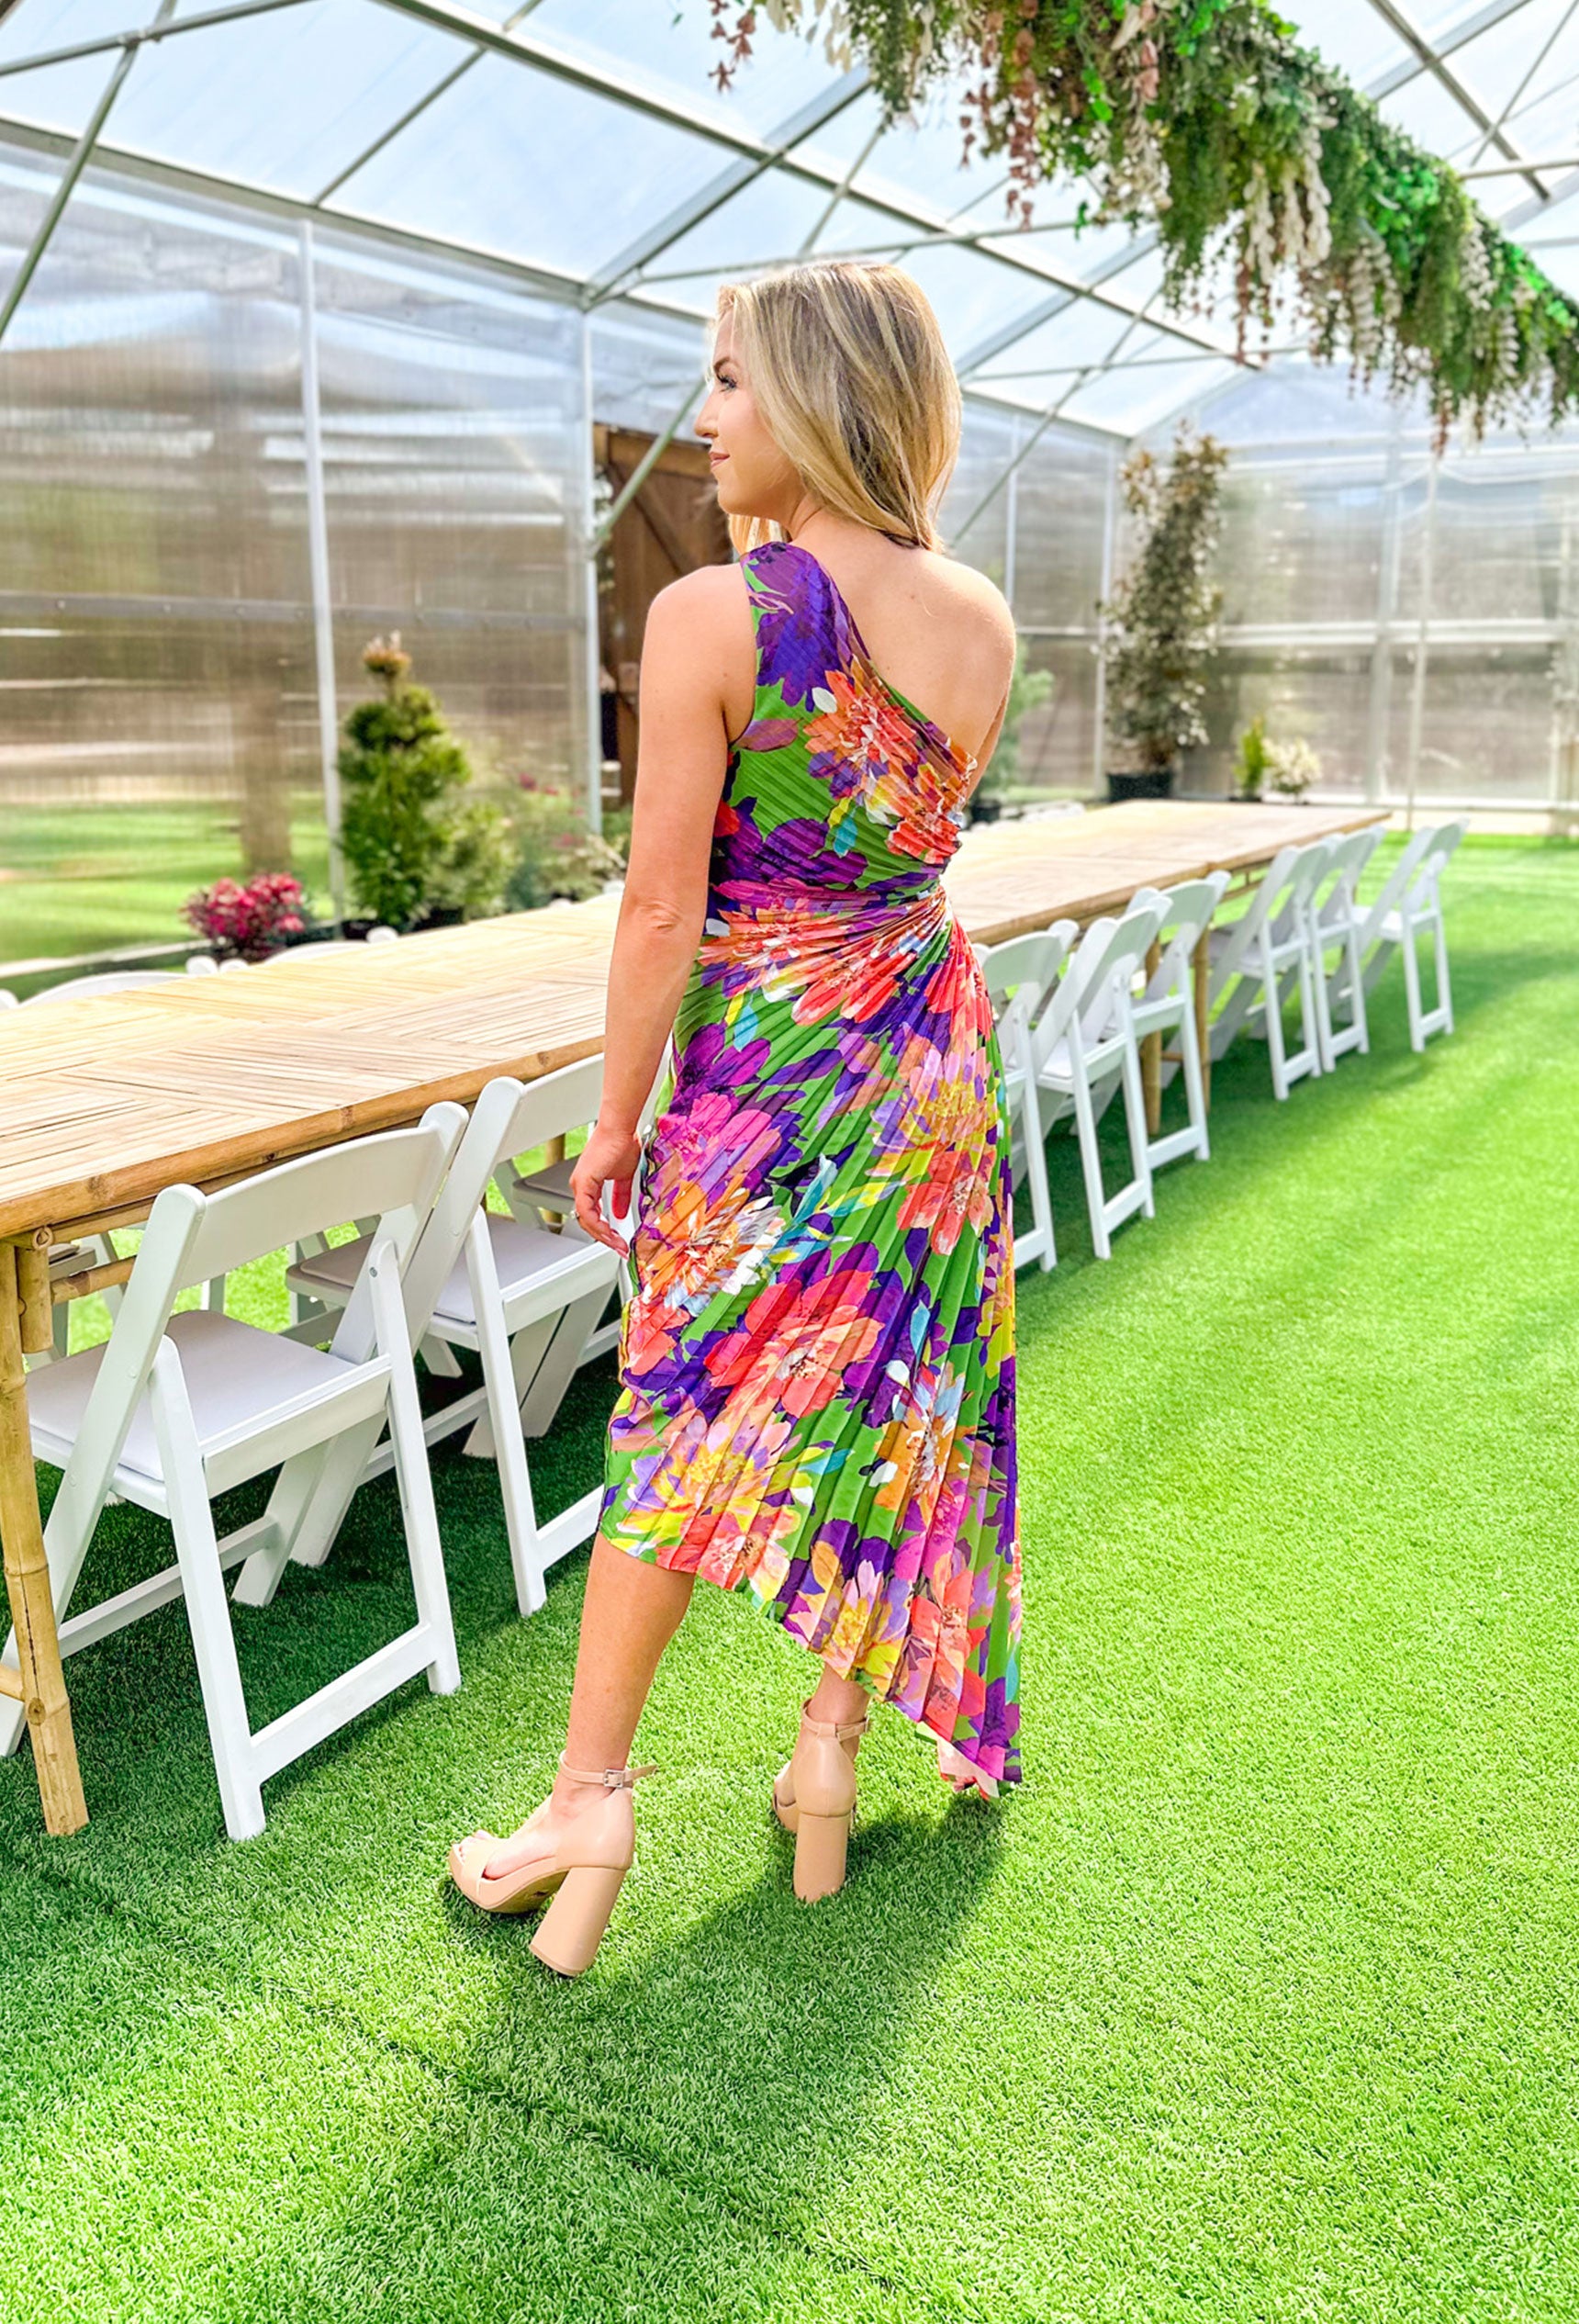 City Of Love Dress, pleated floral one shoulder dress in the colors green, purple, pink, orange, coral and white